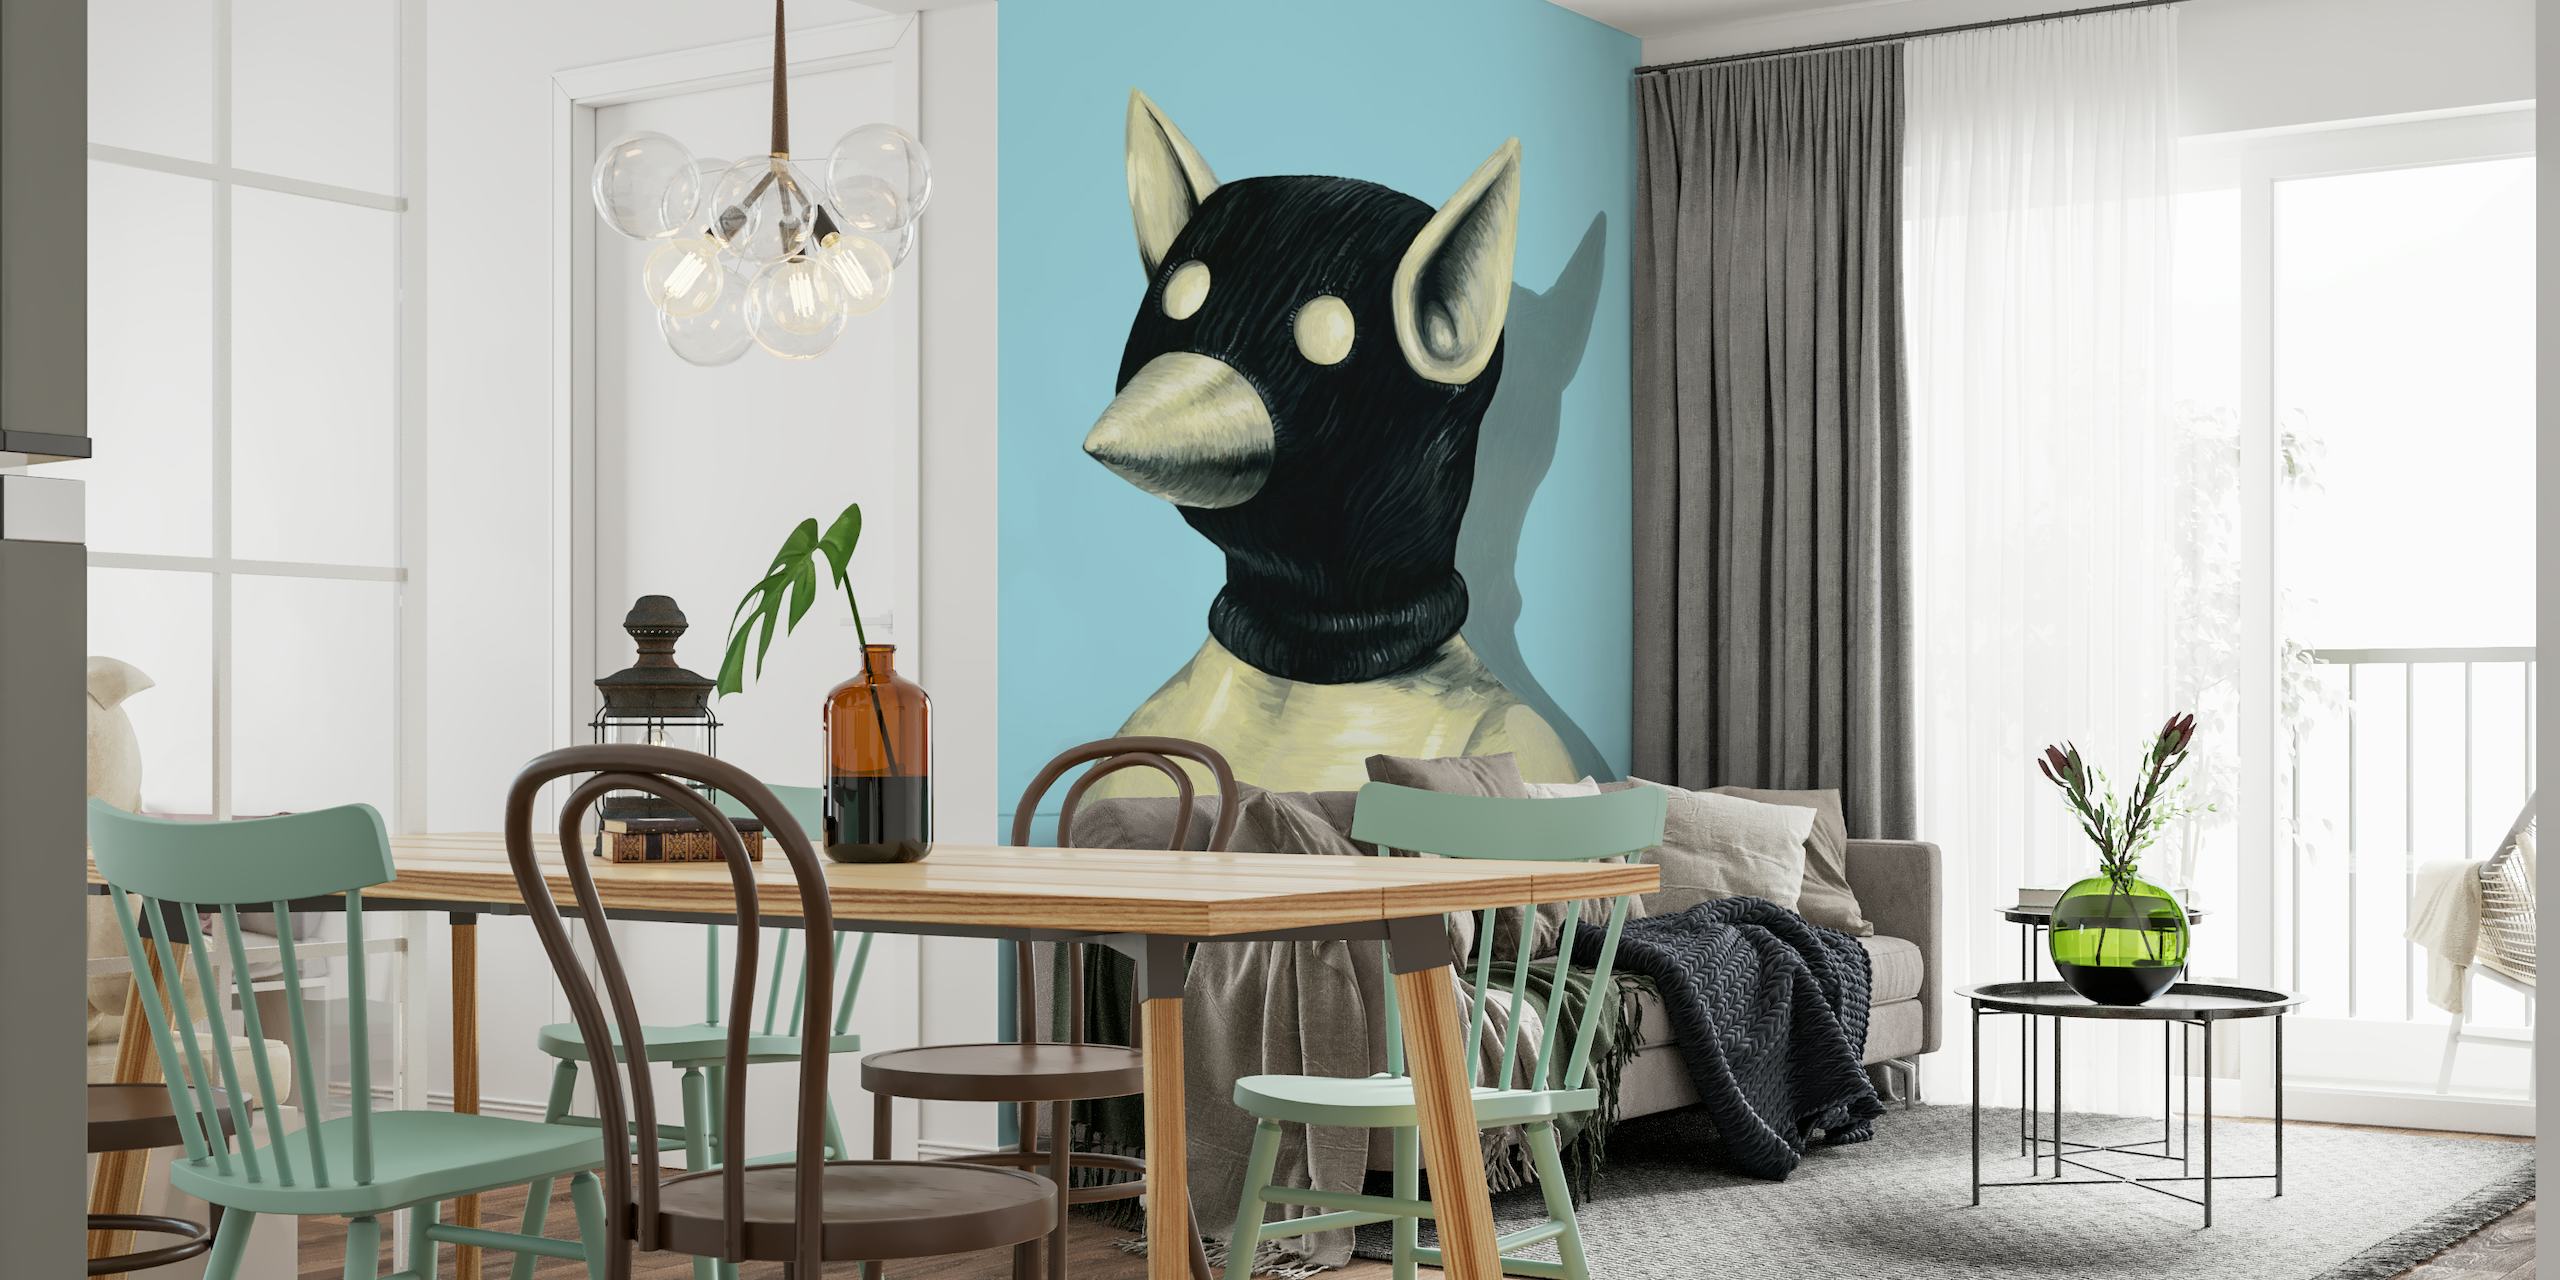 Whimsical Bandit Hat wall mural with stylized black hat figure on a blue background